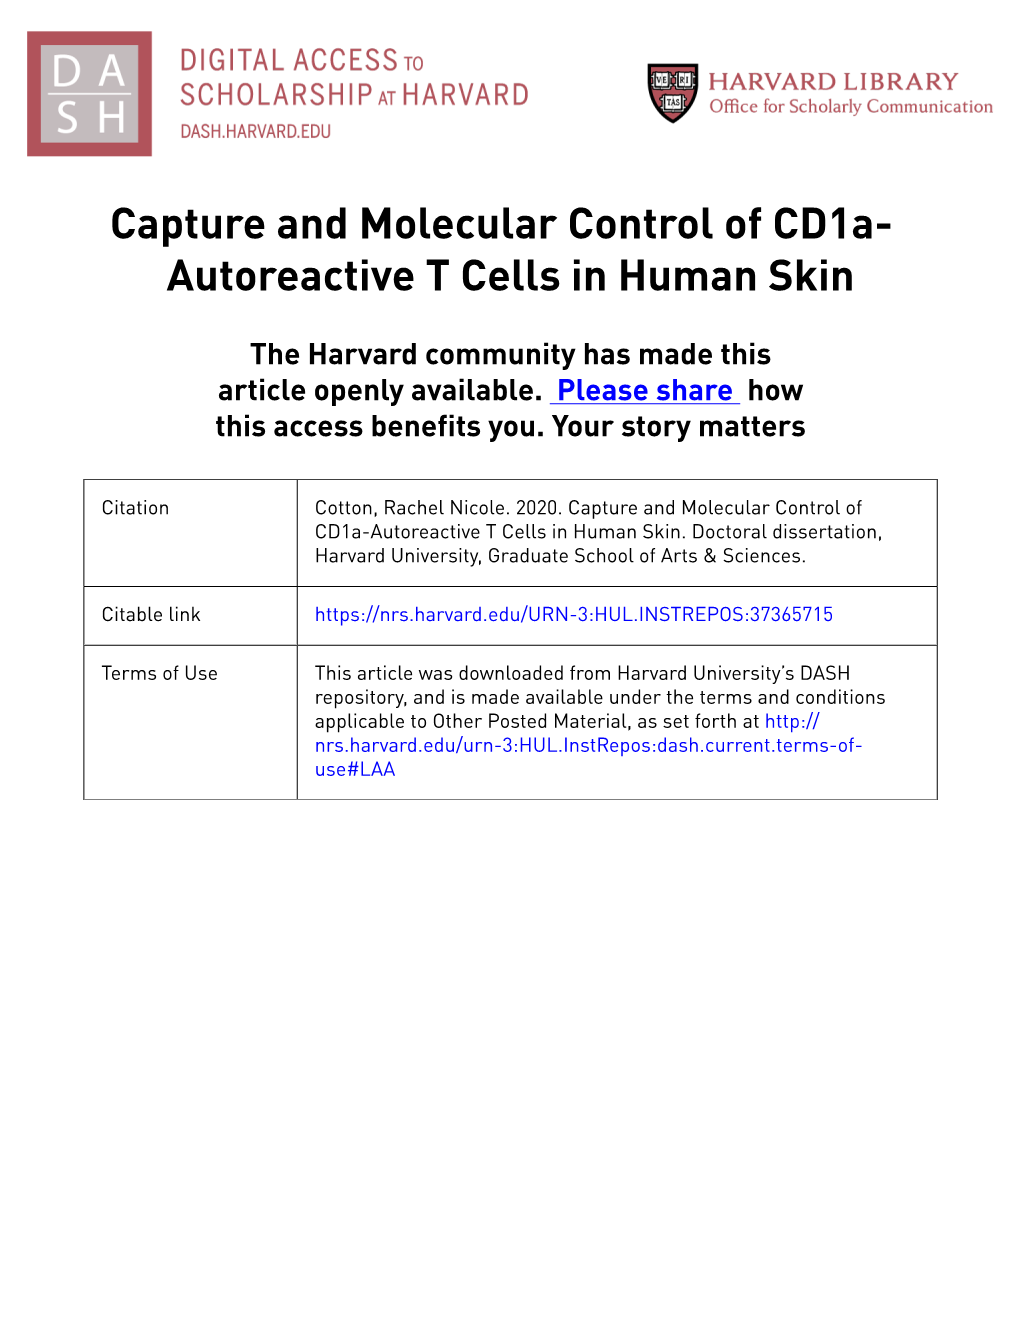 Capture and Molecular Control of Cd1a- Autoreactive T Cells in Human Skin